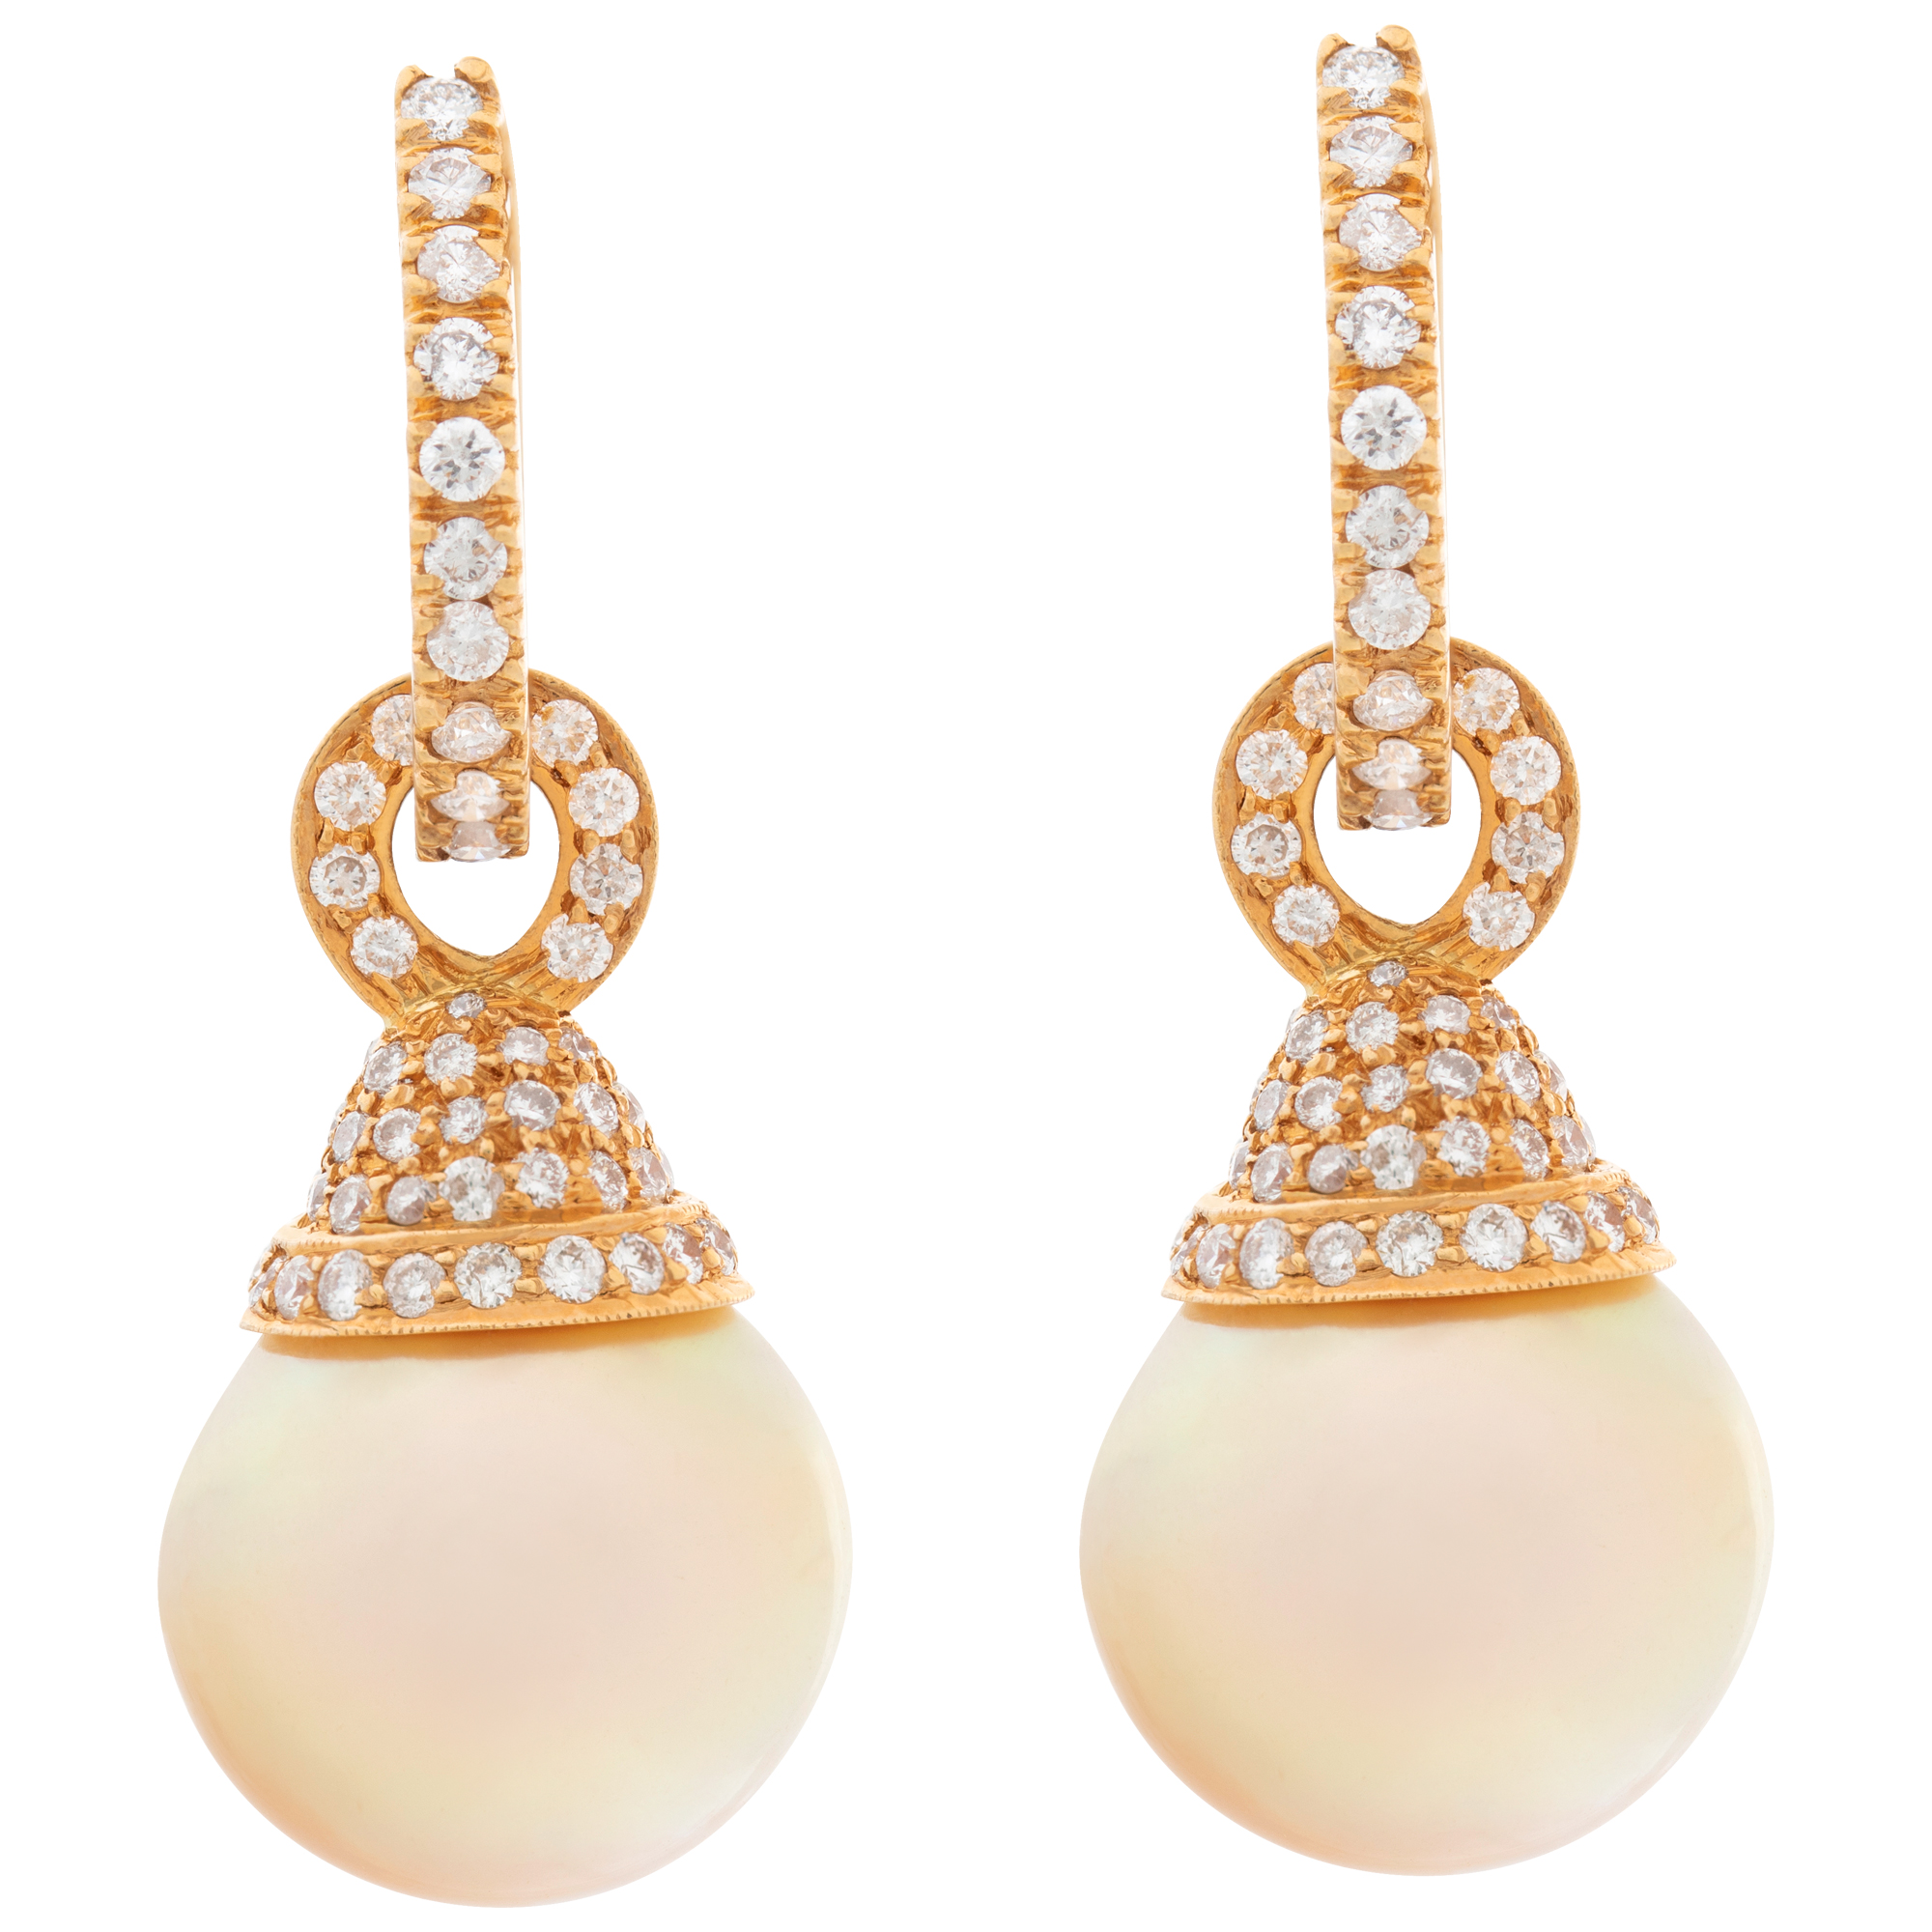 South Sea pearls (15 x 16mm)  and approx 2 carats diamonds dangling earrings set in 18k image 1